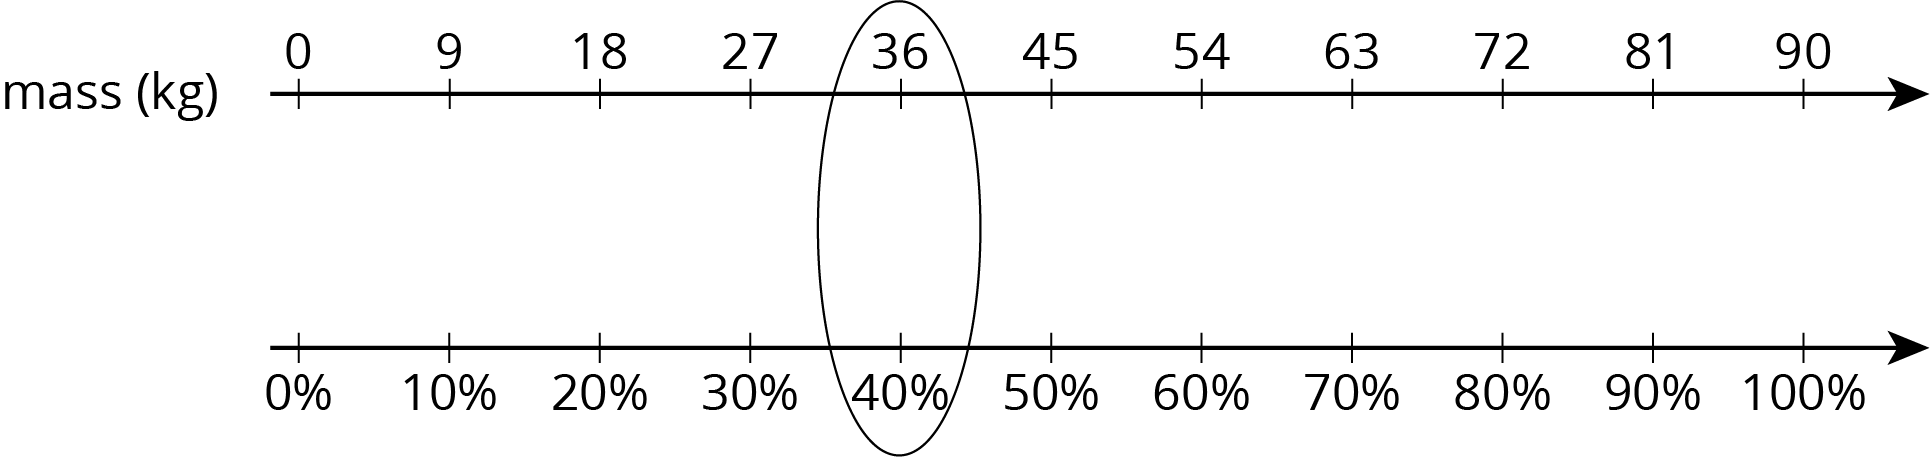 A double number line with eleven evenly spaced tick marks. The top number line is labeled “mass in kiograms" andd starting with the first tick mark 0, 9, 18, 27, 36, 45, 54, 63, 72, 81, 90 are labeled. The bottom number line is not labeled and starting with the first tick mark zero percent, 10 percent, 20 percent, 30 percent, 40 percent, 50 percent, 60 percent, 70 percent, 80, percent, 90 percent, 100 percent are labeled.